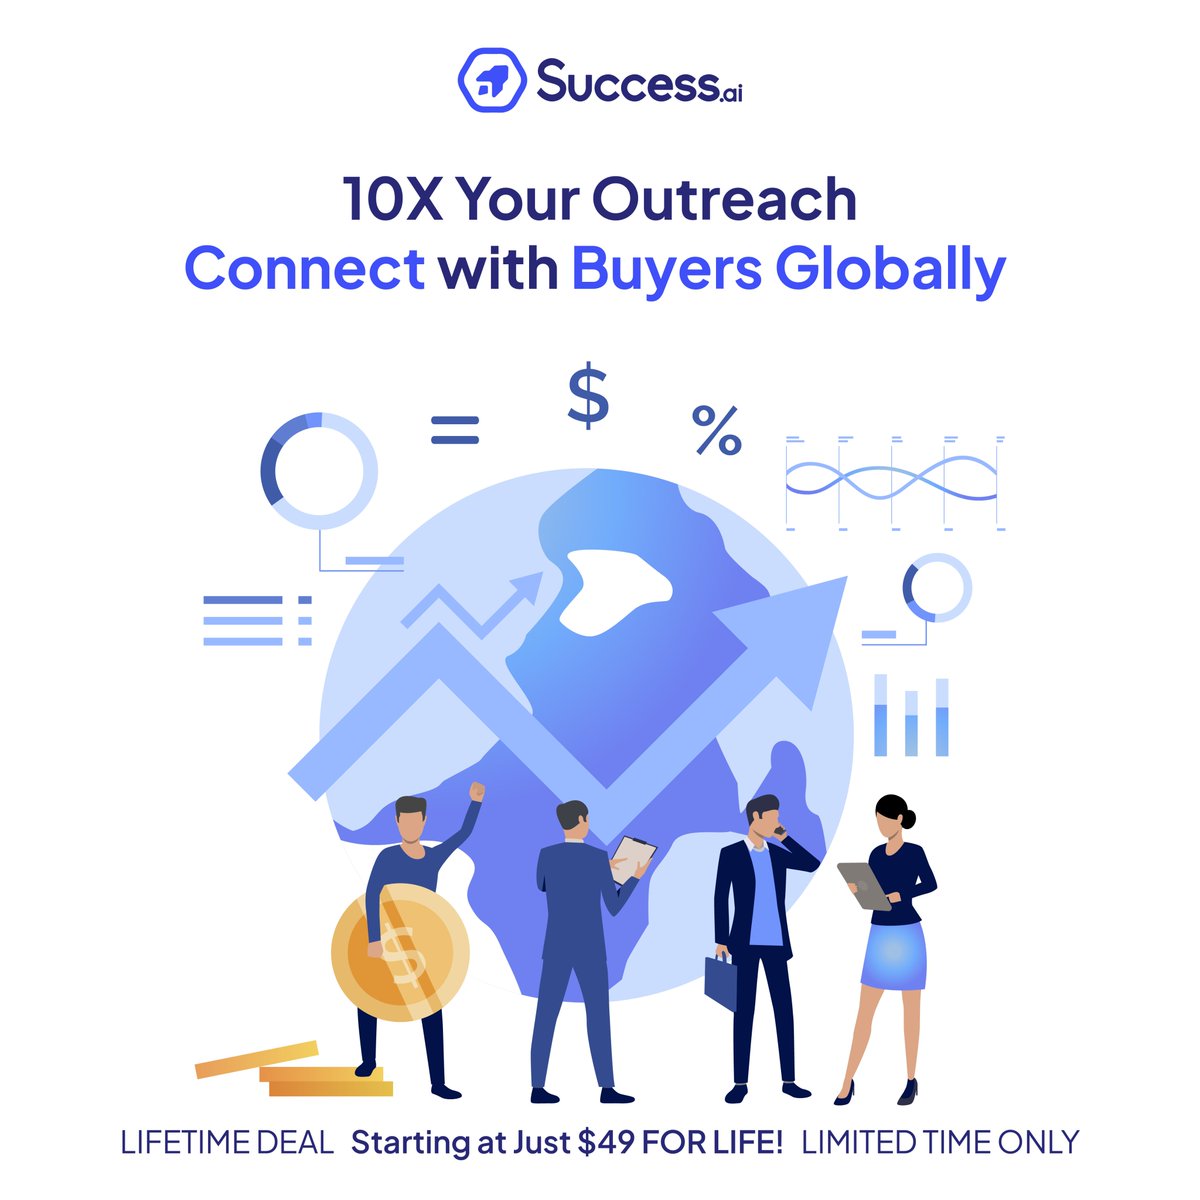 Boost global outreach with Success.ai! 
Secure a $49 lifetime deal to connect with buyers worldwide. 
Don't miss out, limited offer! Grab now: appsumo.com/products/succe… 

#SuccessAI #GlobalBuyers #MarketingMastery #ReachTheWorld